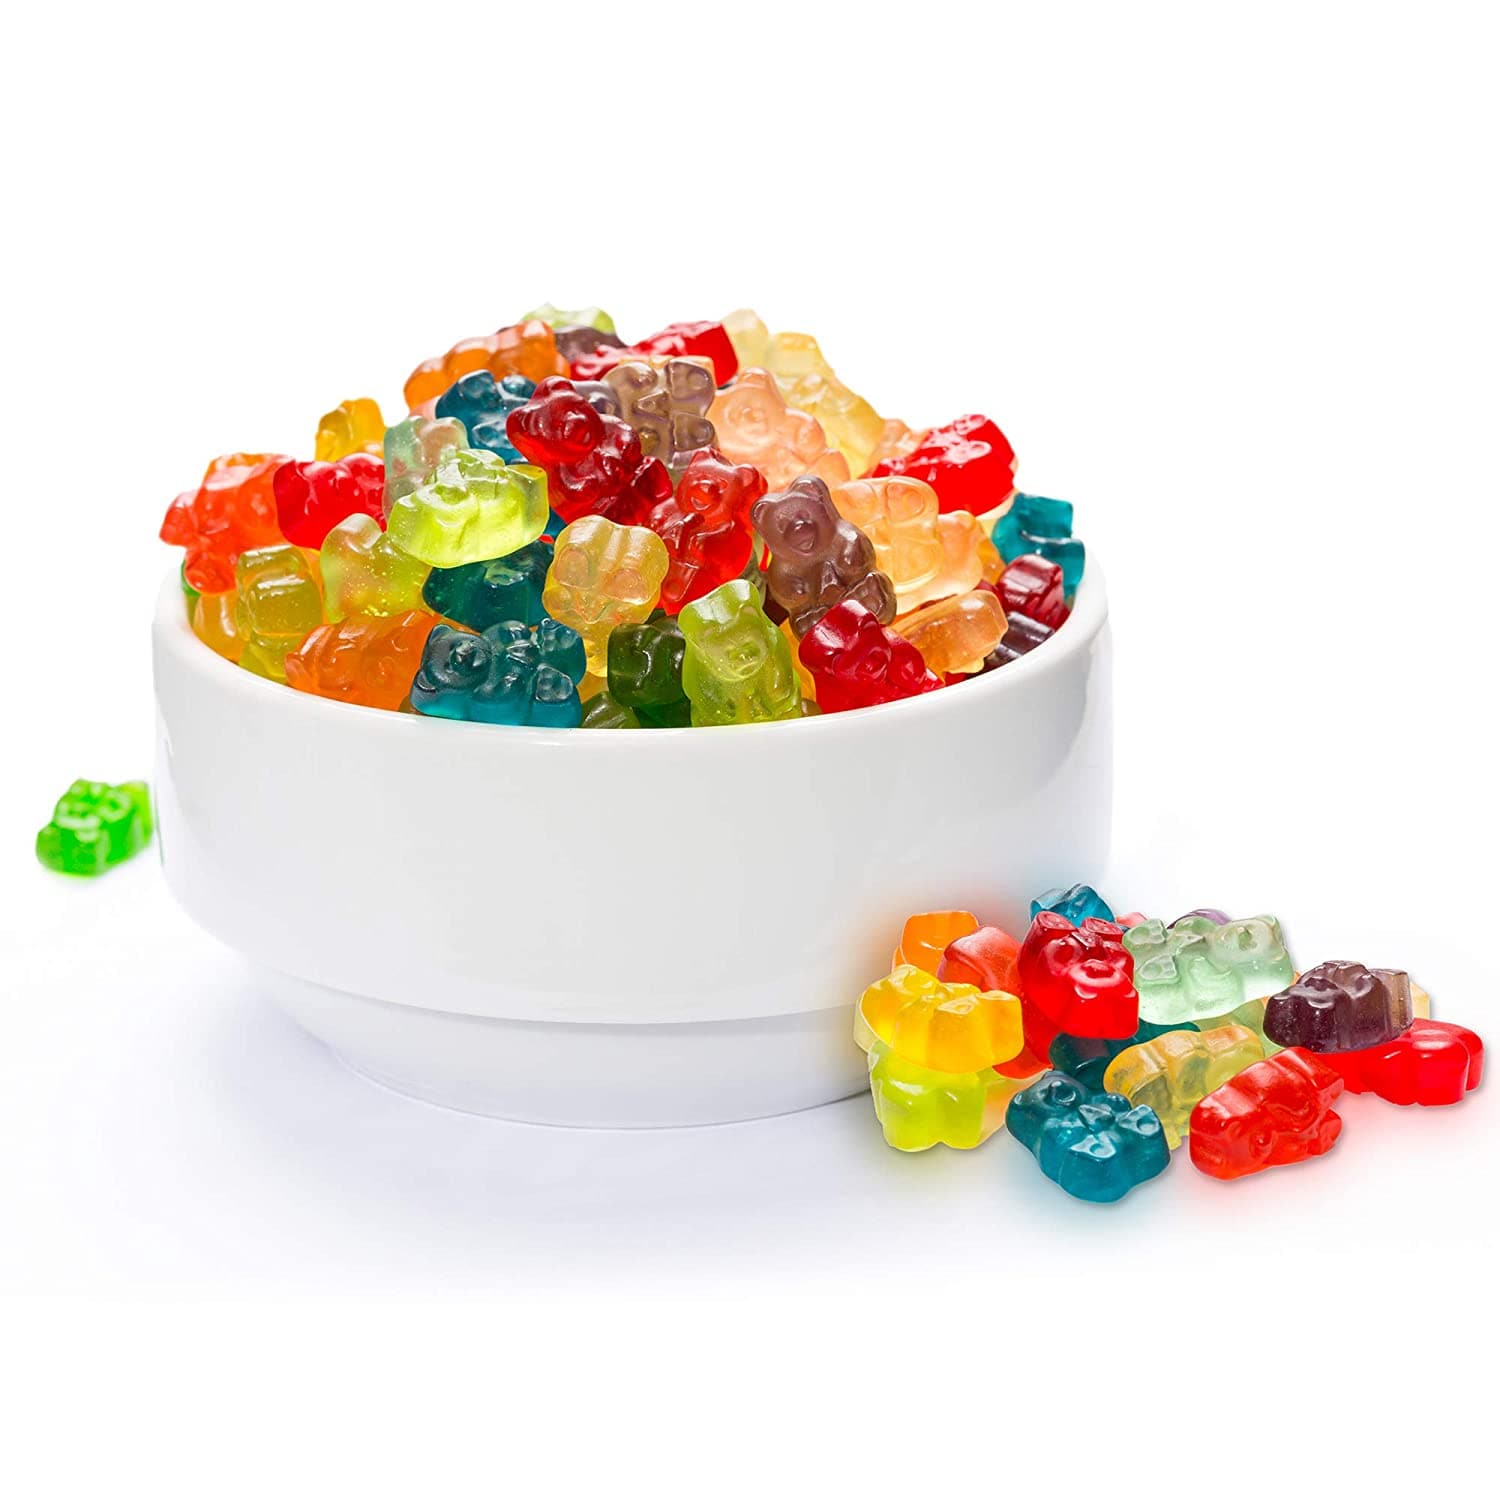 Albanese Confectionery-12 Flavor Gummi Bears 27 oz. Share Size Bag-53465-Legacy Toys